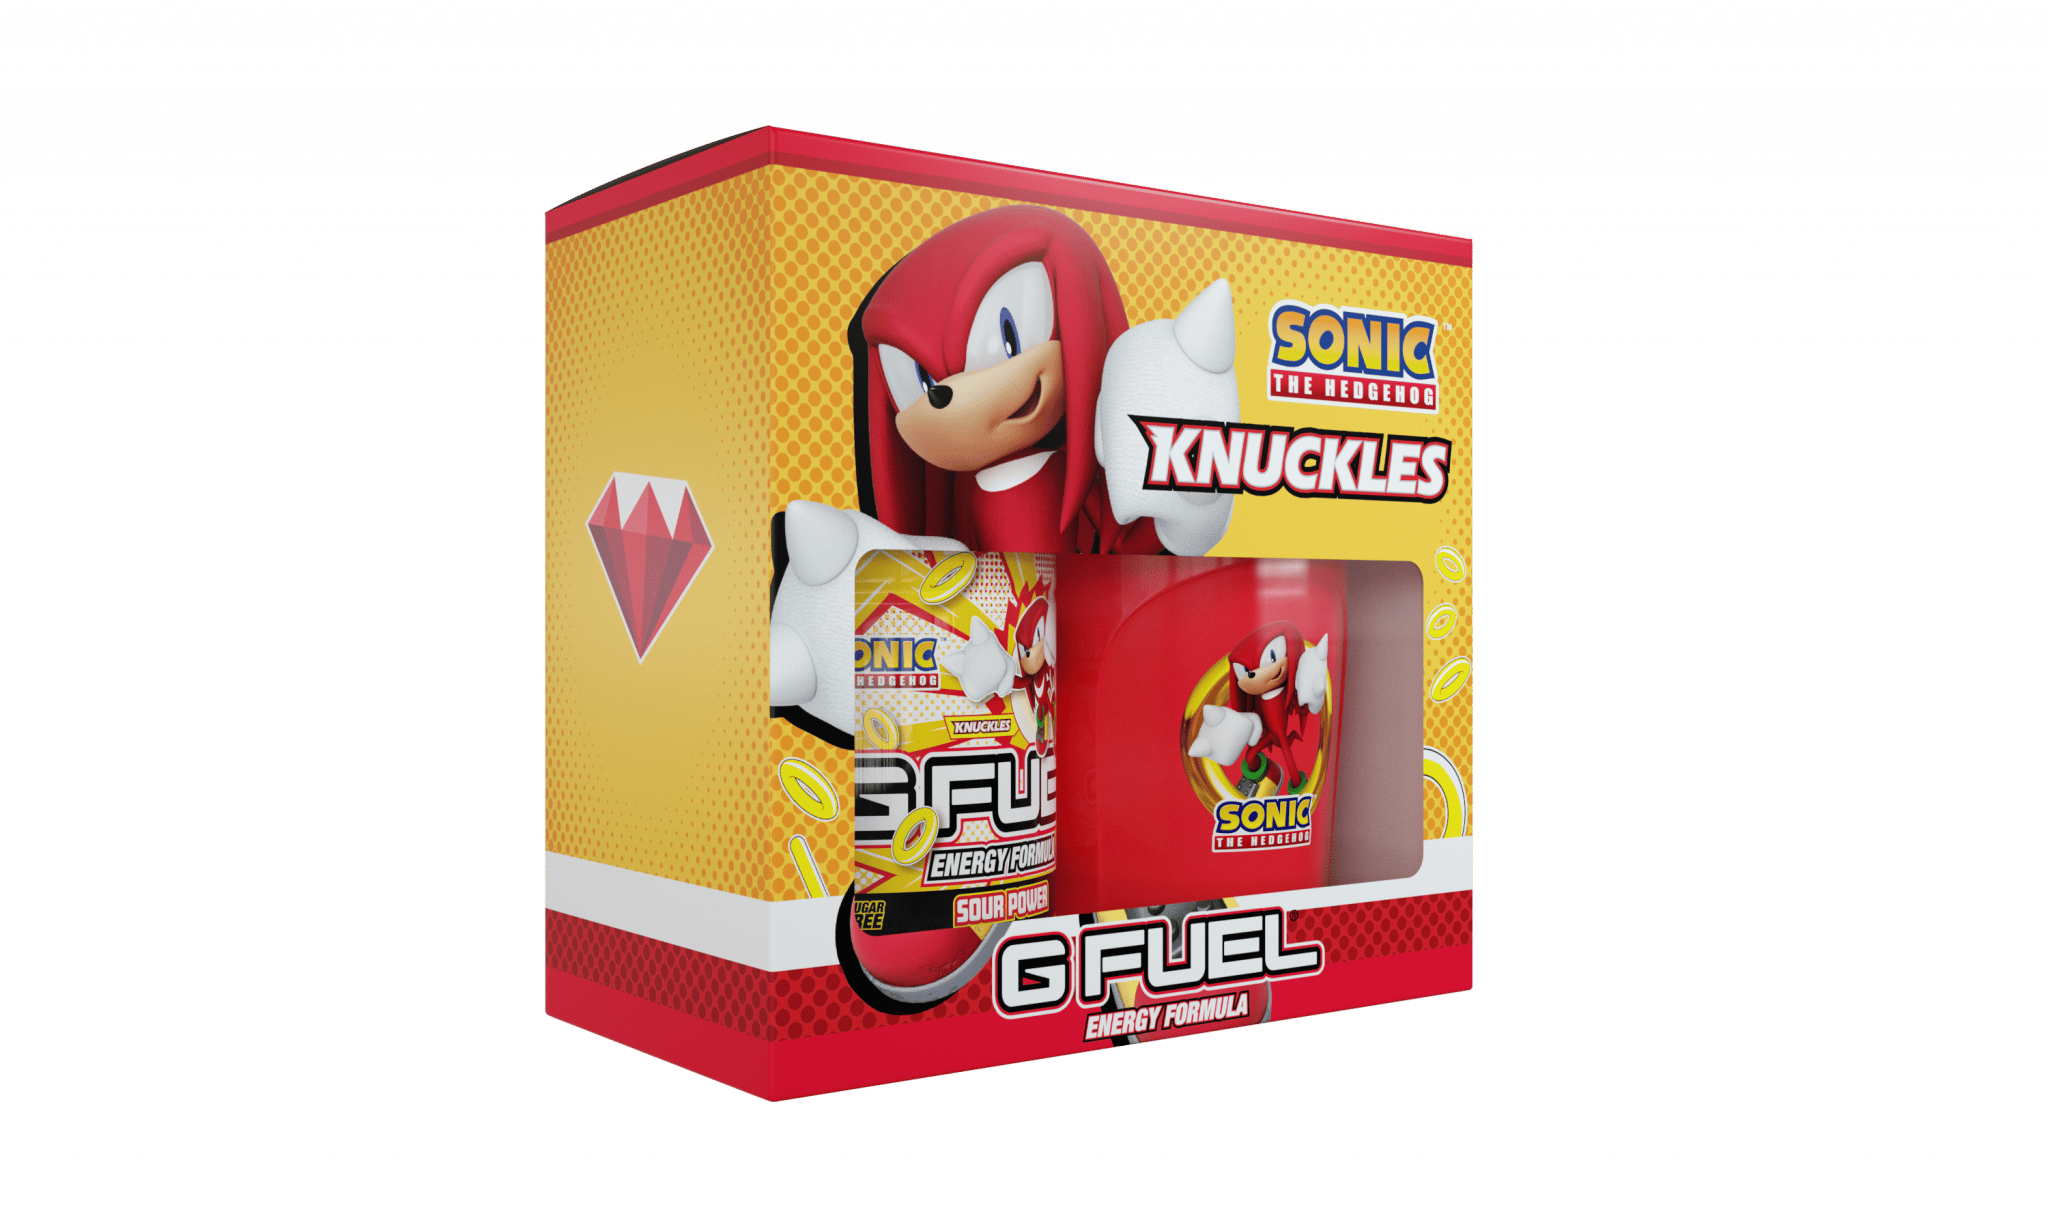 New Sonic The Hedgehog Merchandise Revealed; Knuckles G FUEL, Statues,  Controller & More - Noisy Pixel